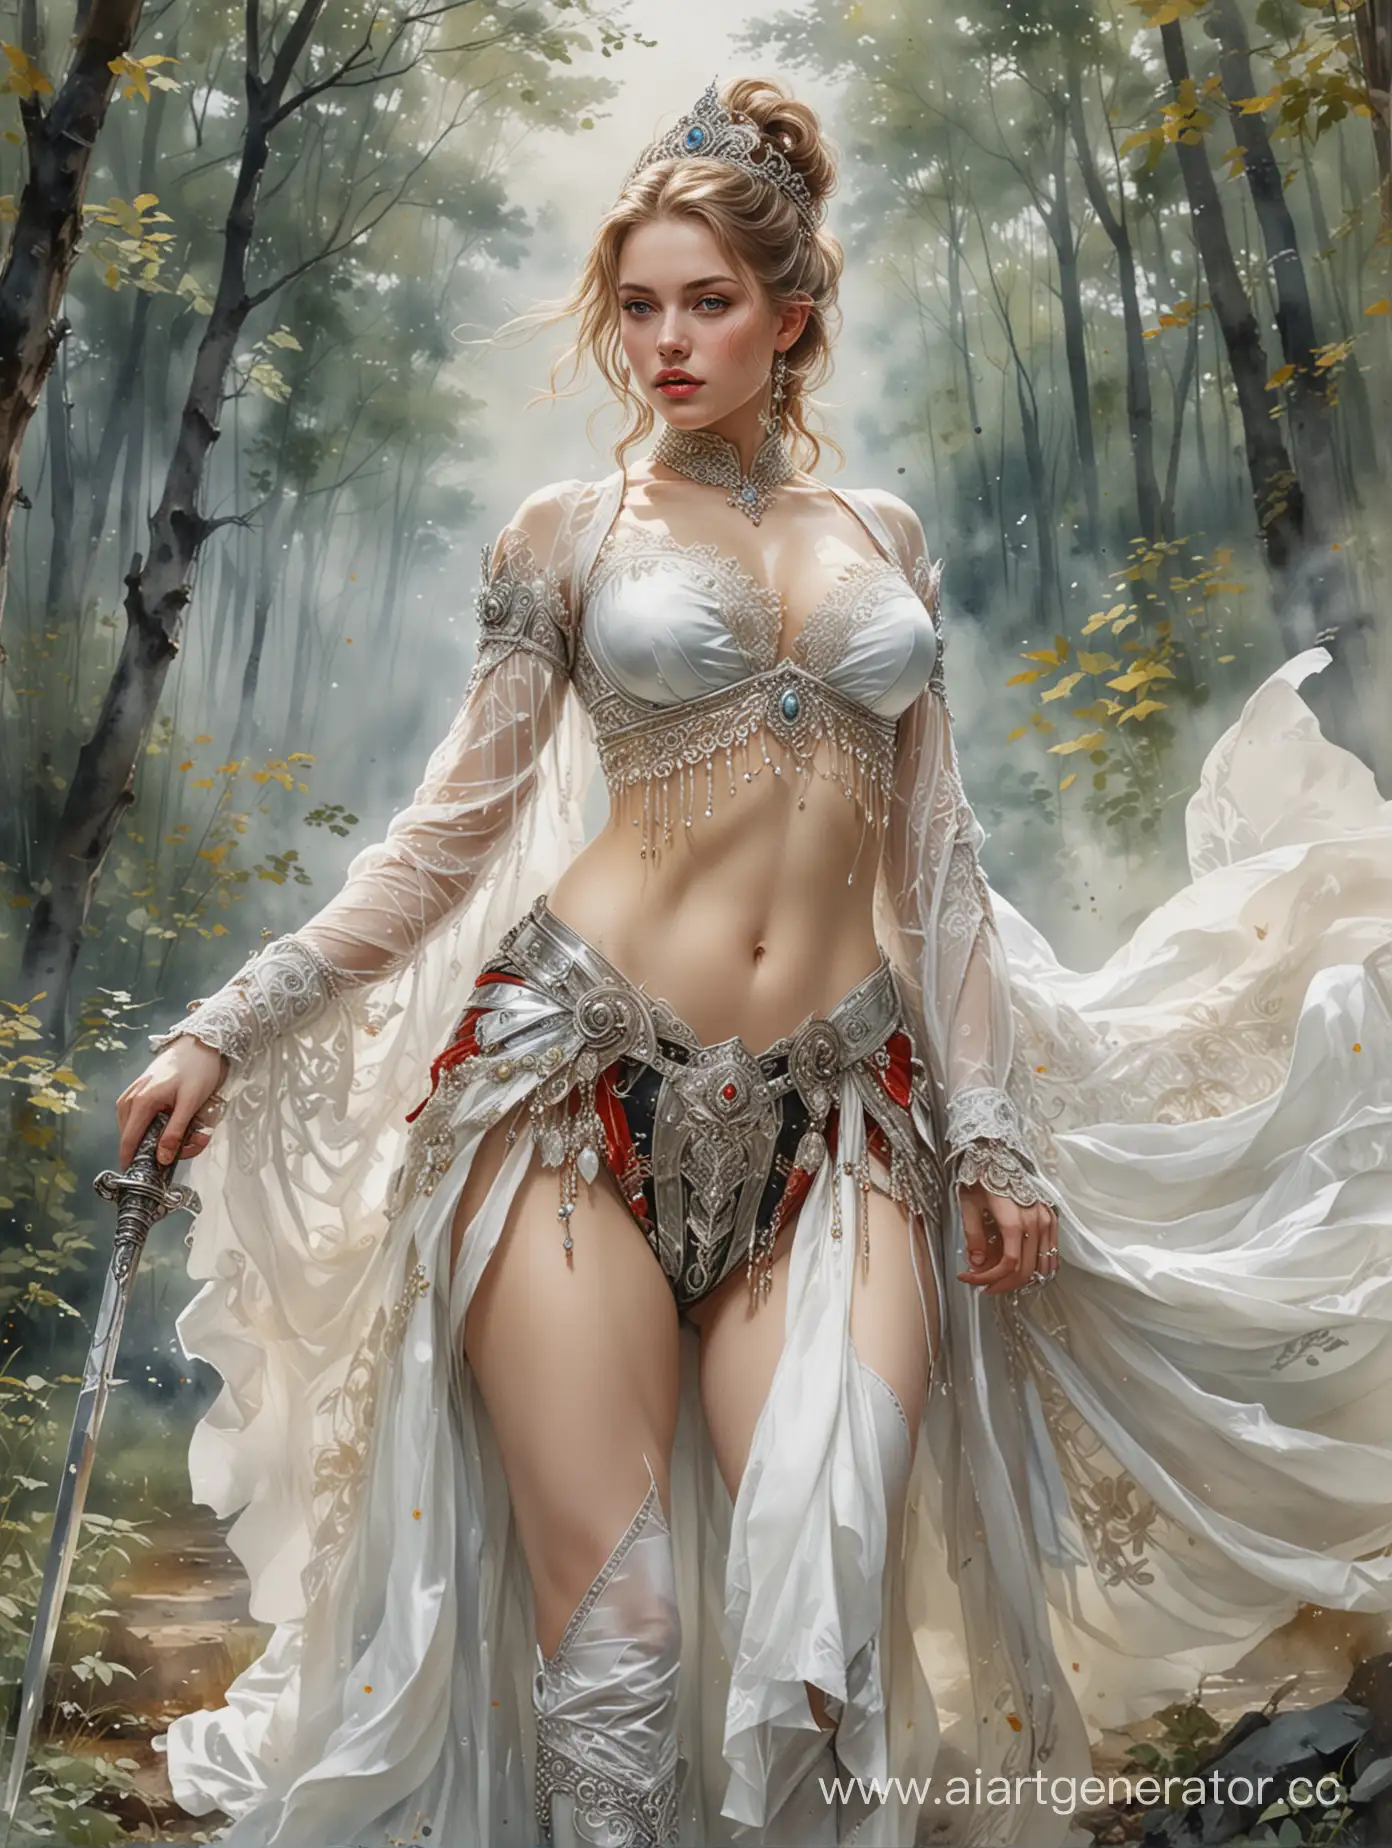 Sensual-Watercolor-Painting-Lush-Hussar-Beauty-Dancing-with-Saber-in-Forest-Clearing